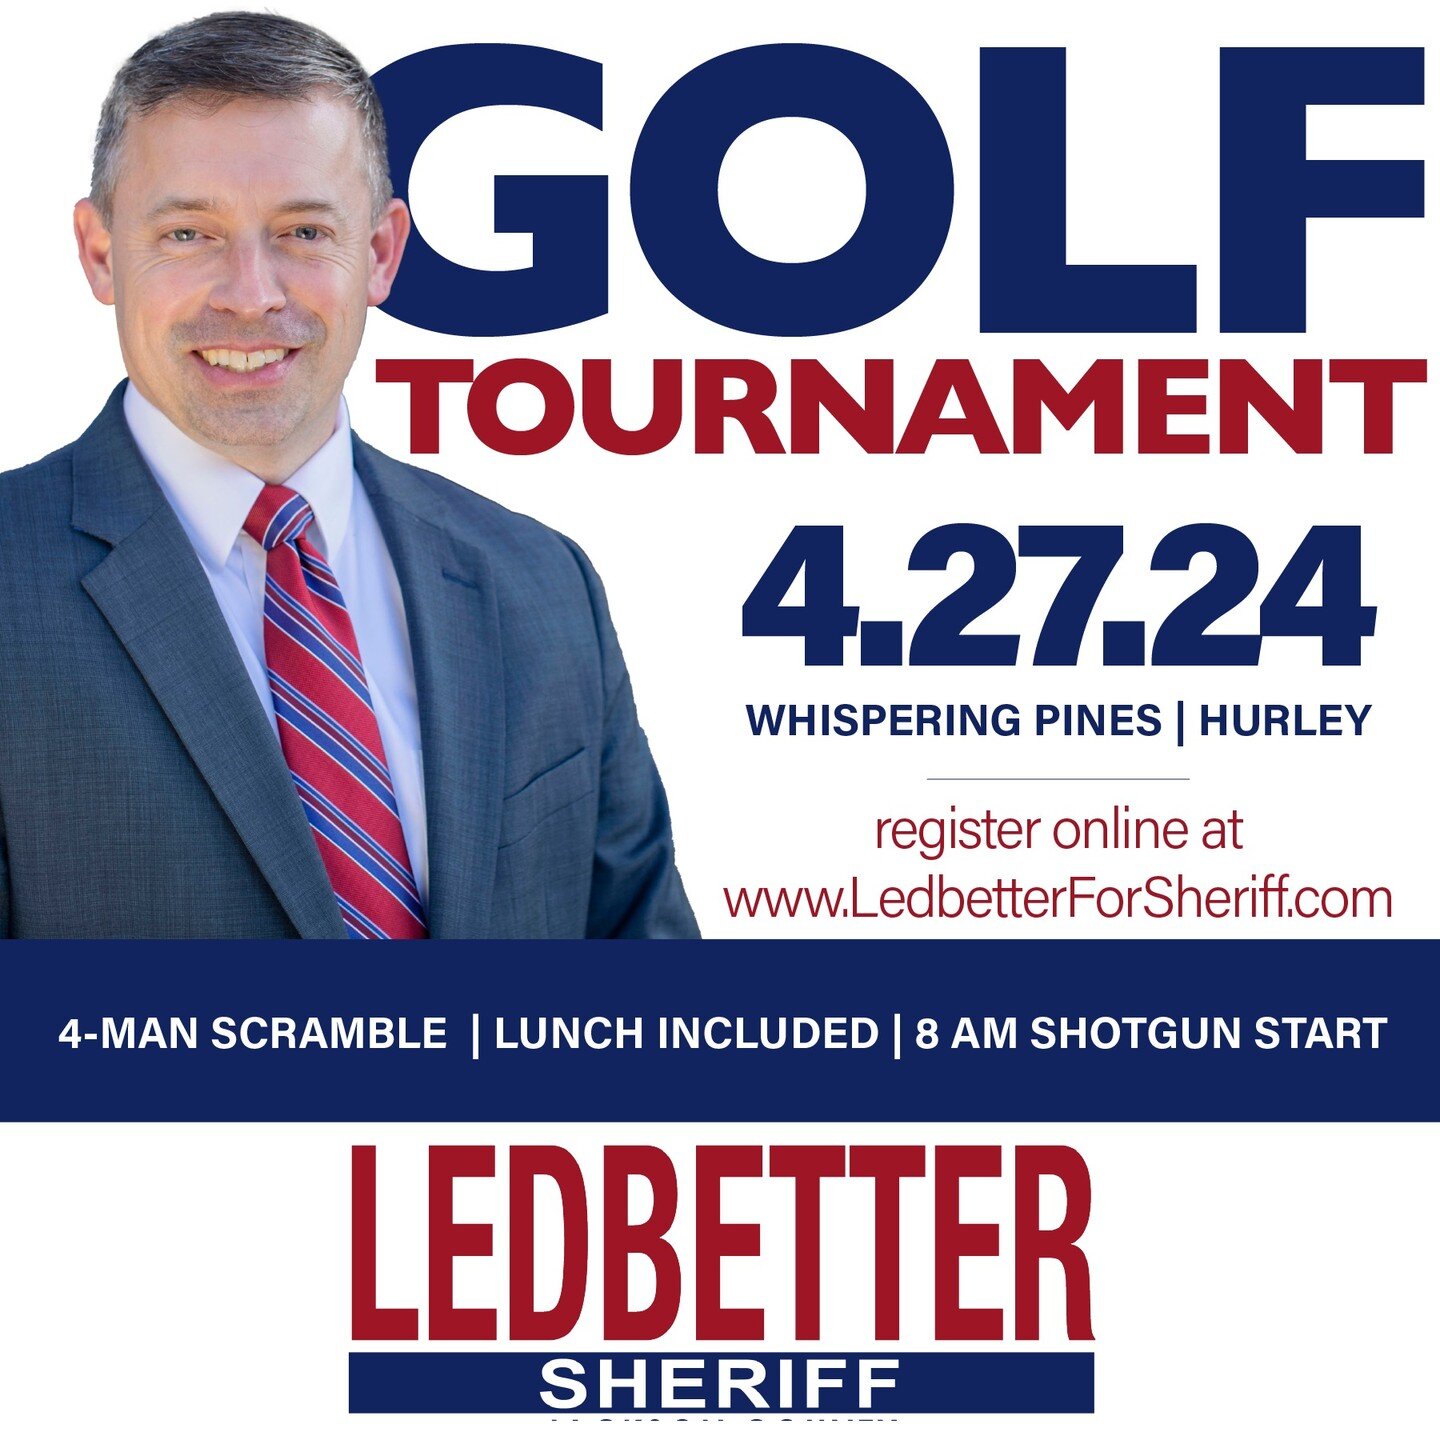 Have you signed up for the LEDBETTER GOLF TOURNAMENT yet?? Register your 4-man team, sponsor the tournament, or purchase a hole sponsorship on our website &mdash;&gt; www.LedbetterForSheriff.com See you at Whispering Pines on 4/27!!